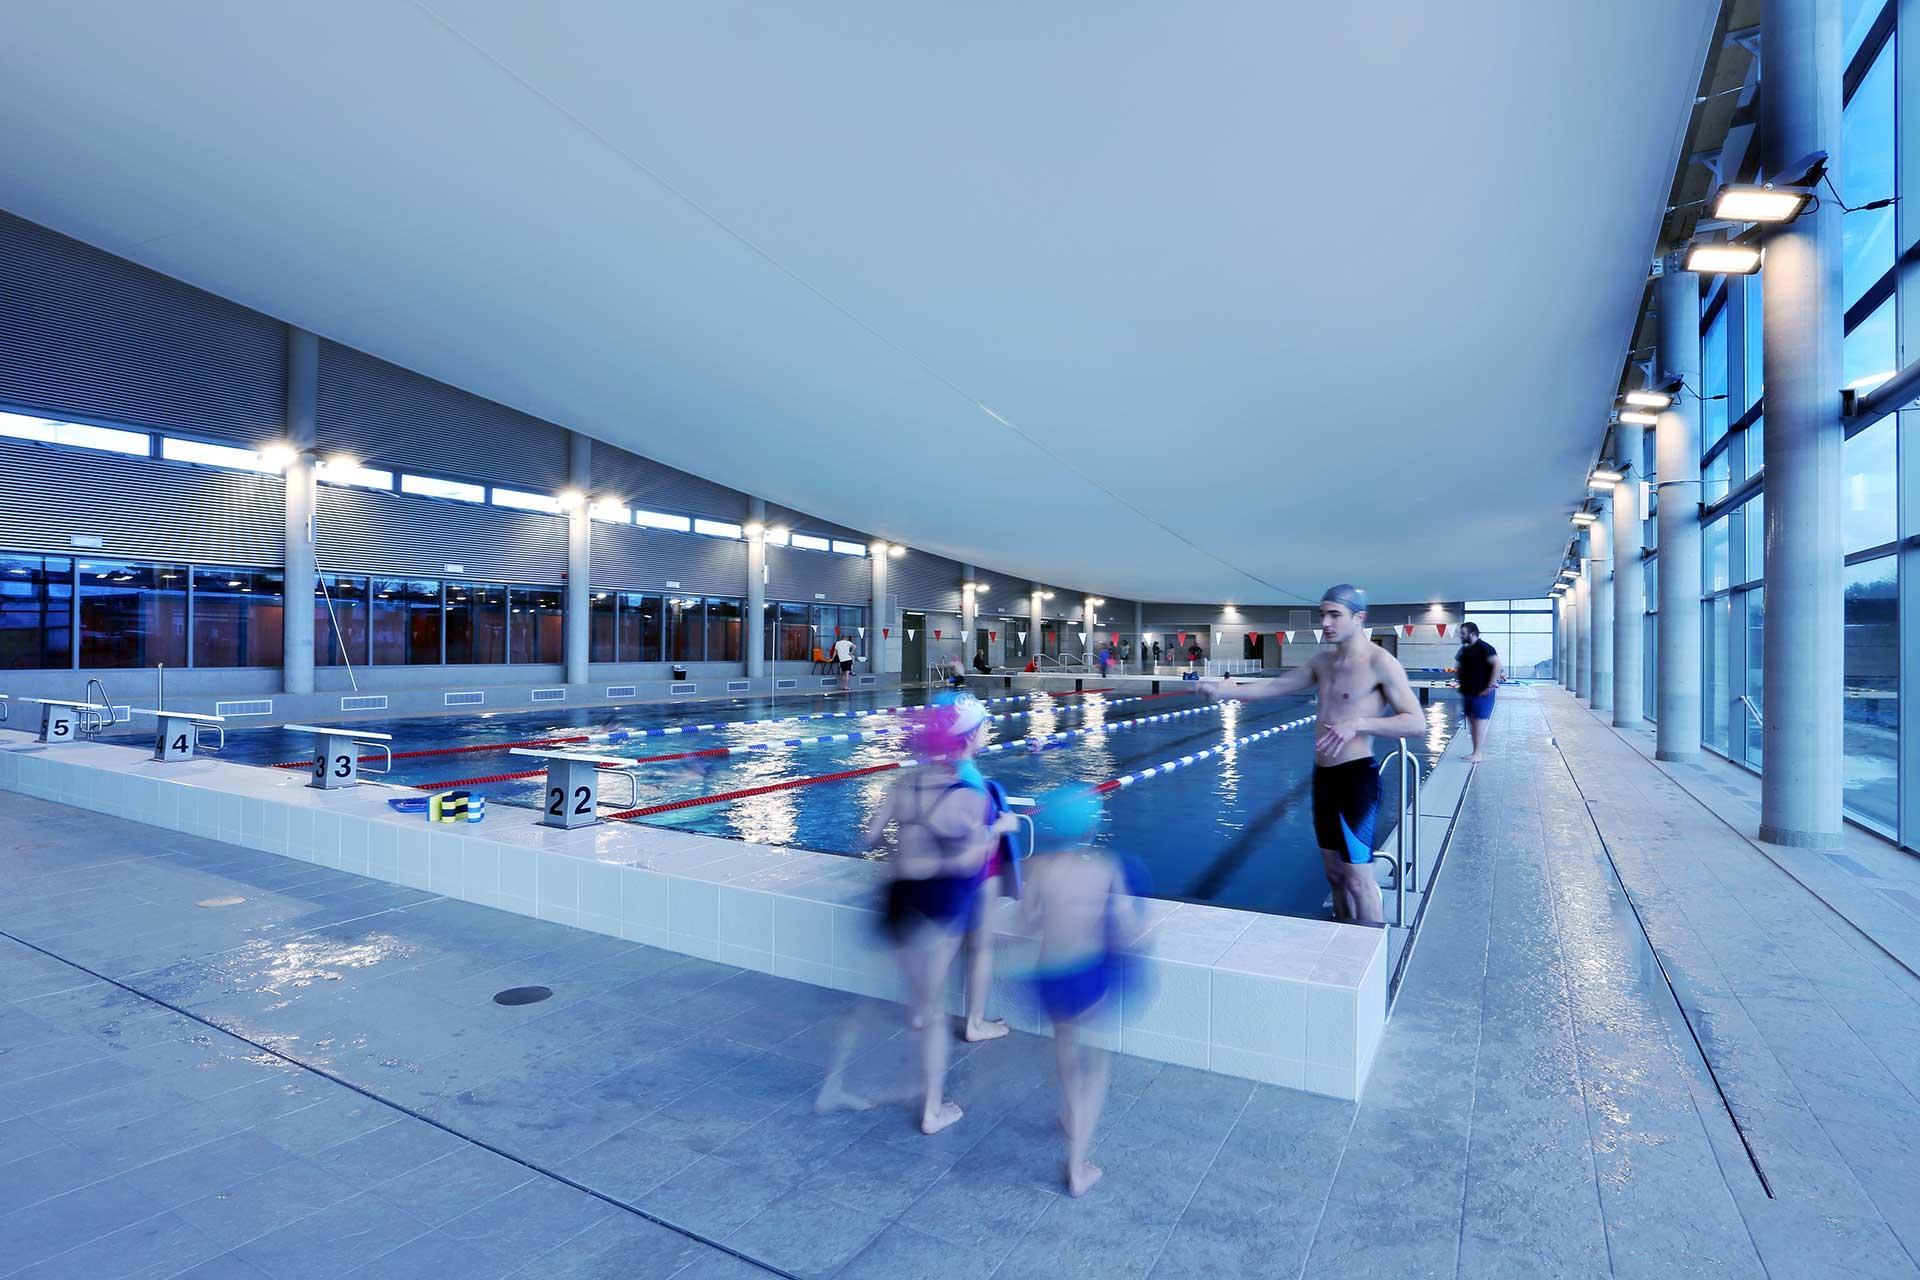 Schréder sports lighting solution cuts energy costs by 67% for Ans swimming pool